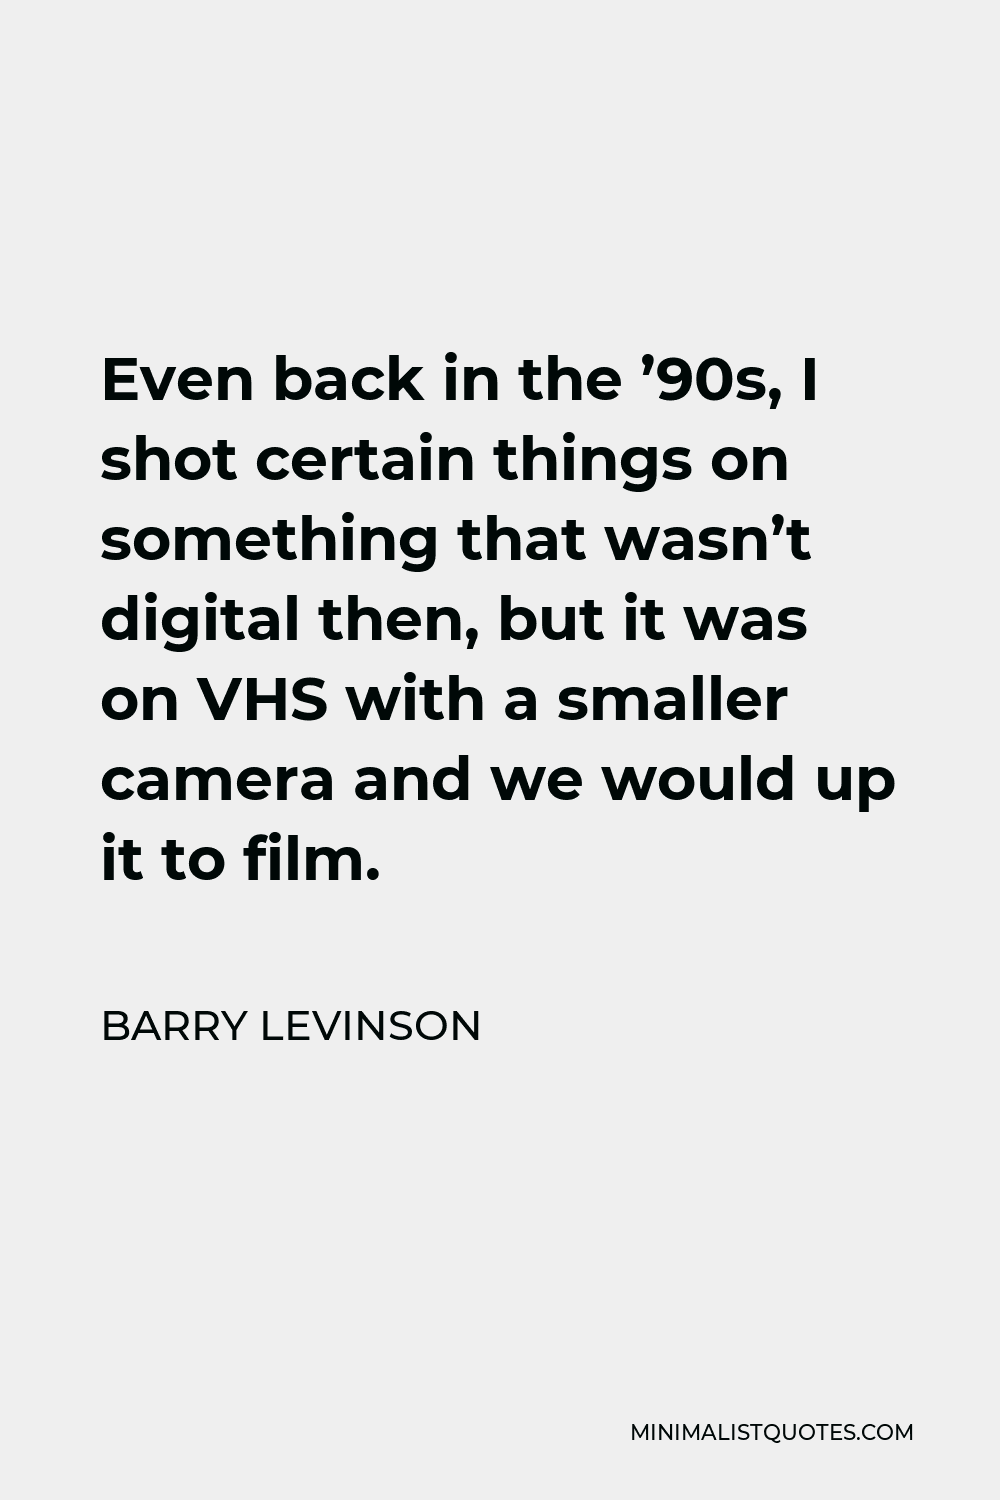 Barry Levinson Quote - Even back in the ’90s, I shot certain things on something that wasn’t digital then, but it was on VHS with a smaller camera and we would up it to film.